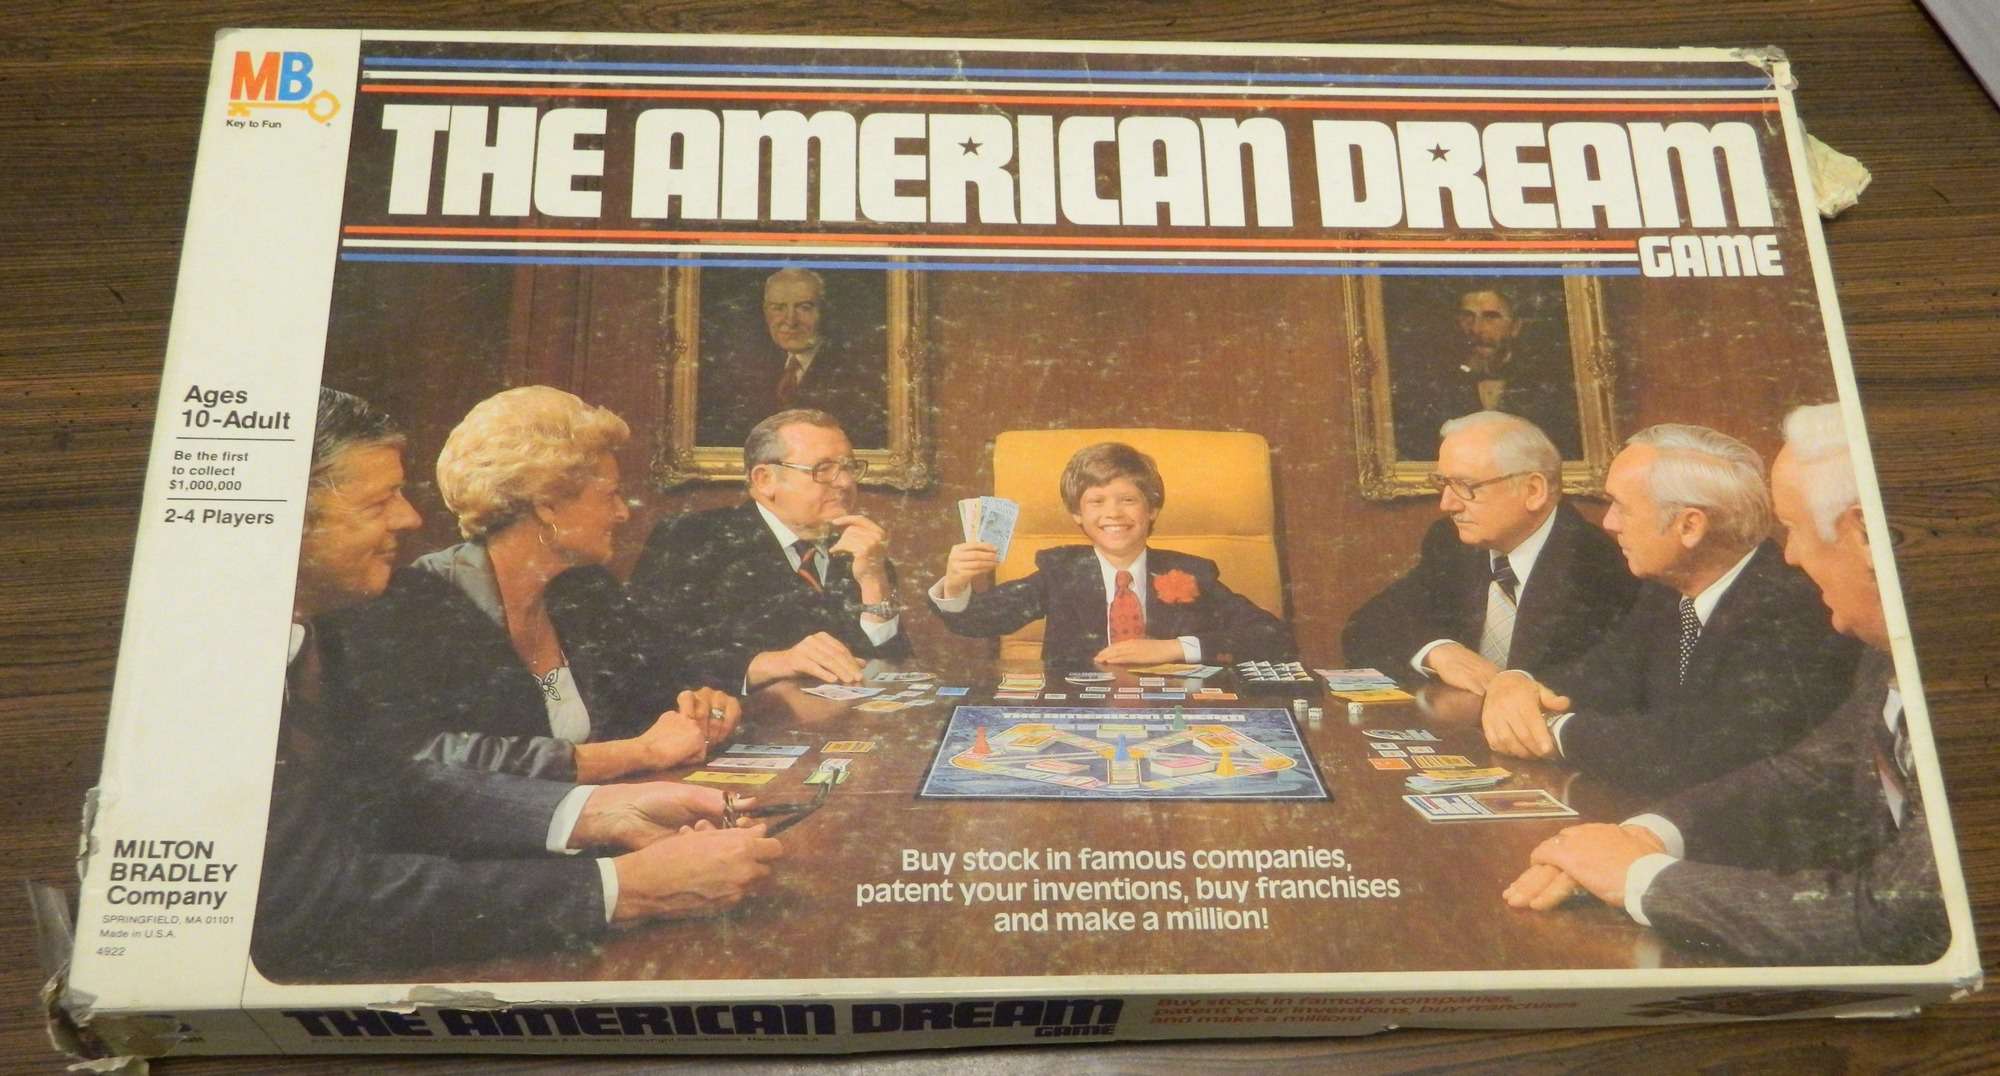 Financial 500: The Business Game - A Waddingtons Game 1980s aka Fortune